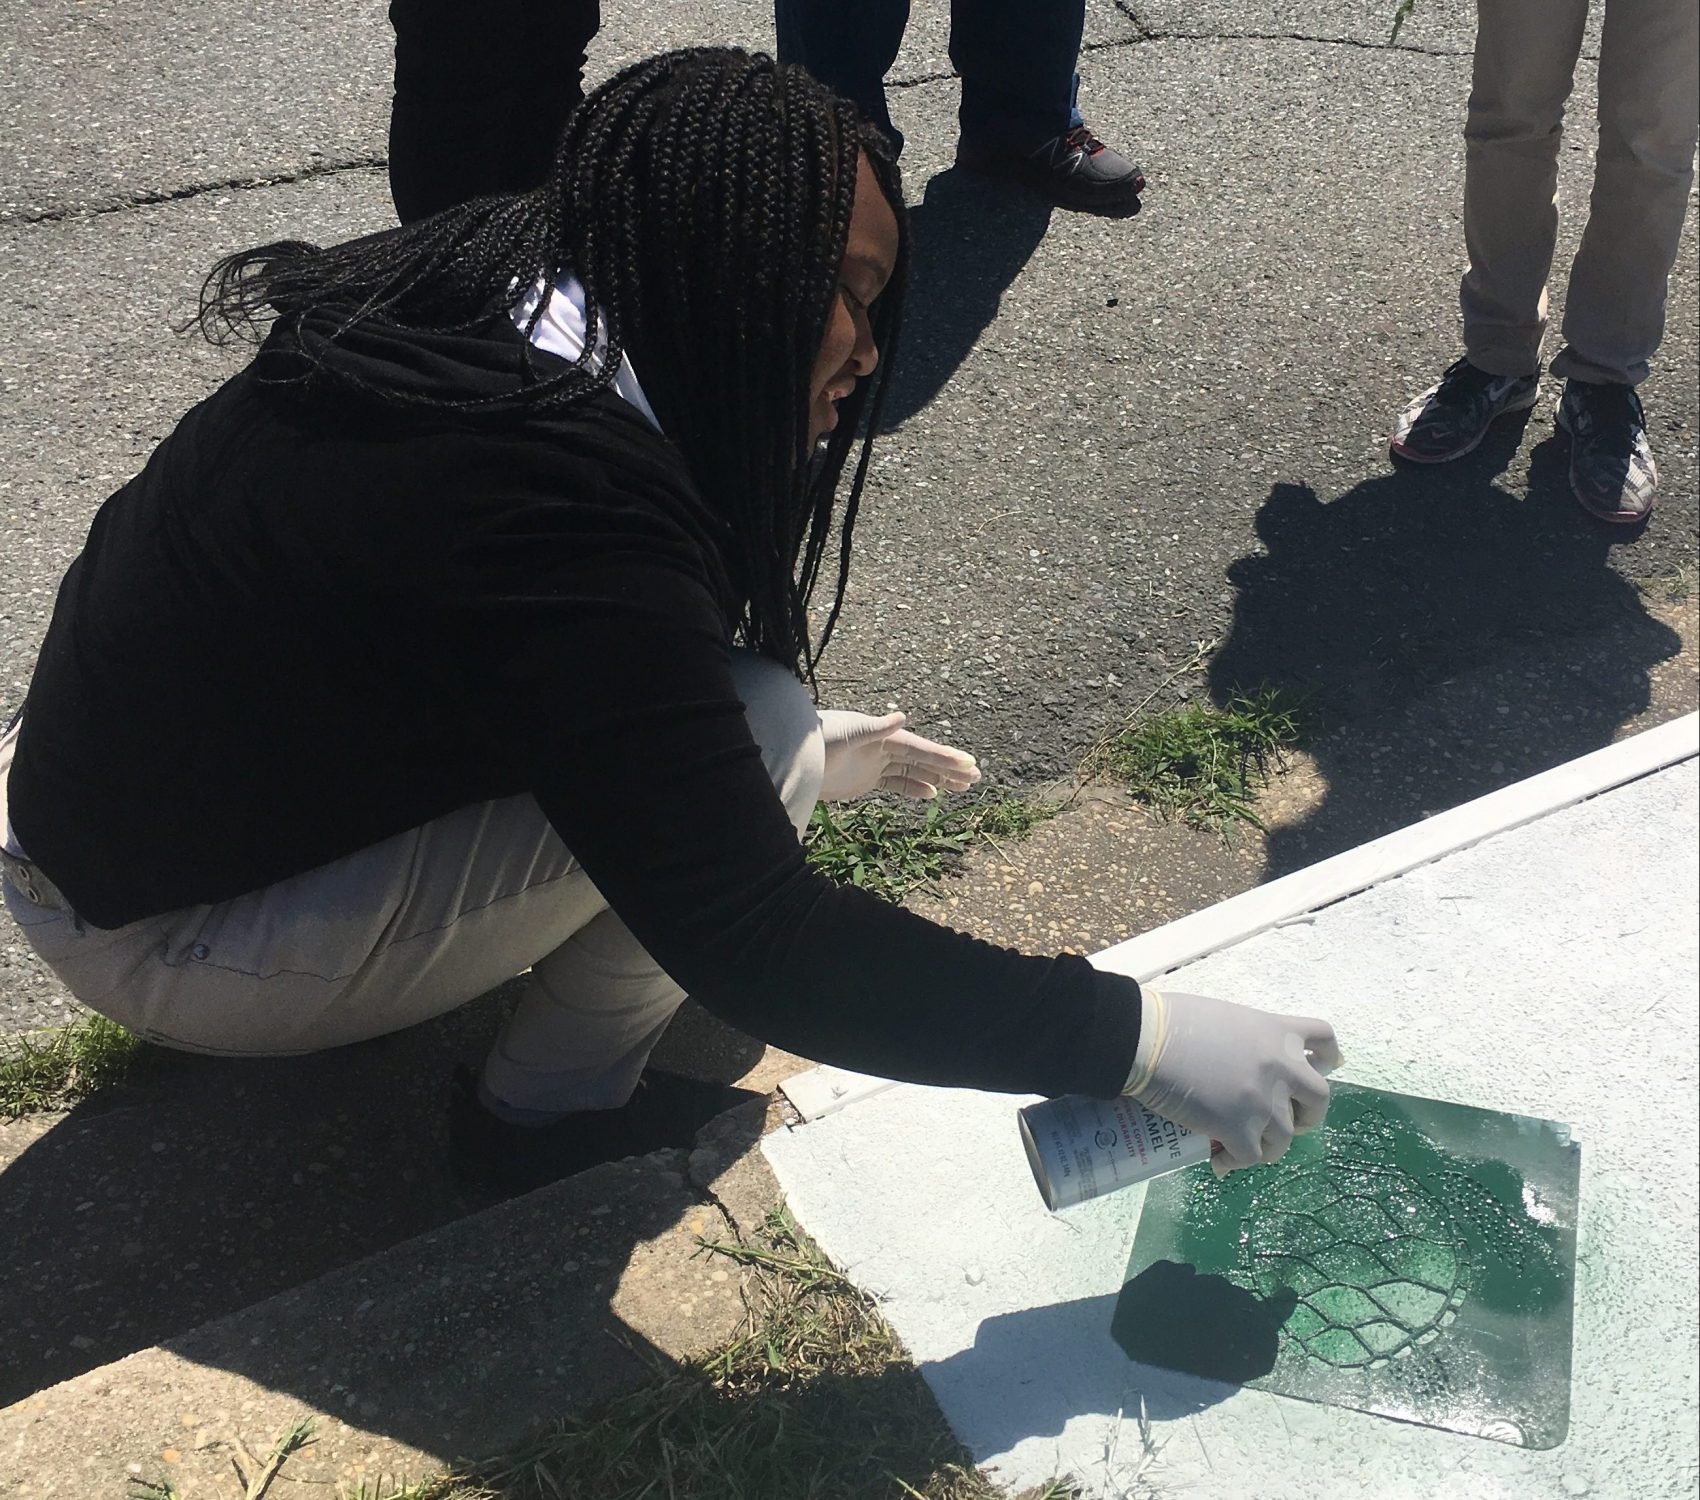 Image of a student kneeling with a can of spray paint in her hand, painting a stormwater drain.